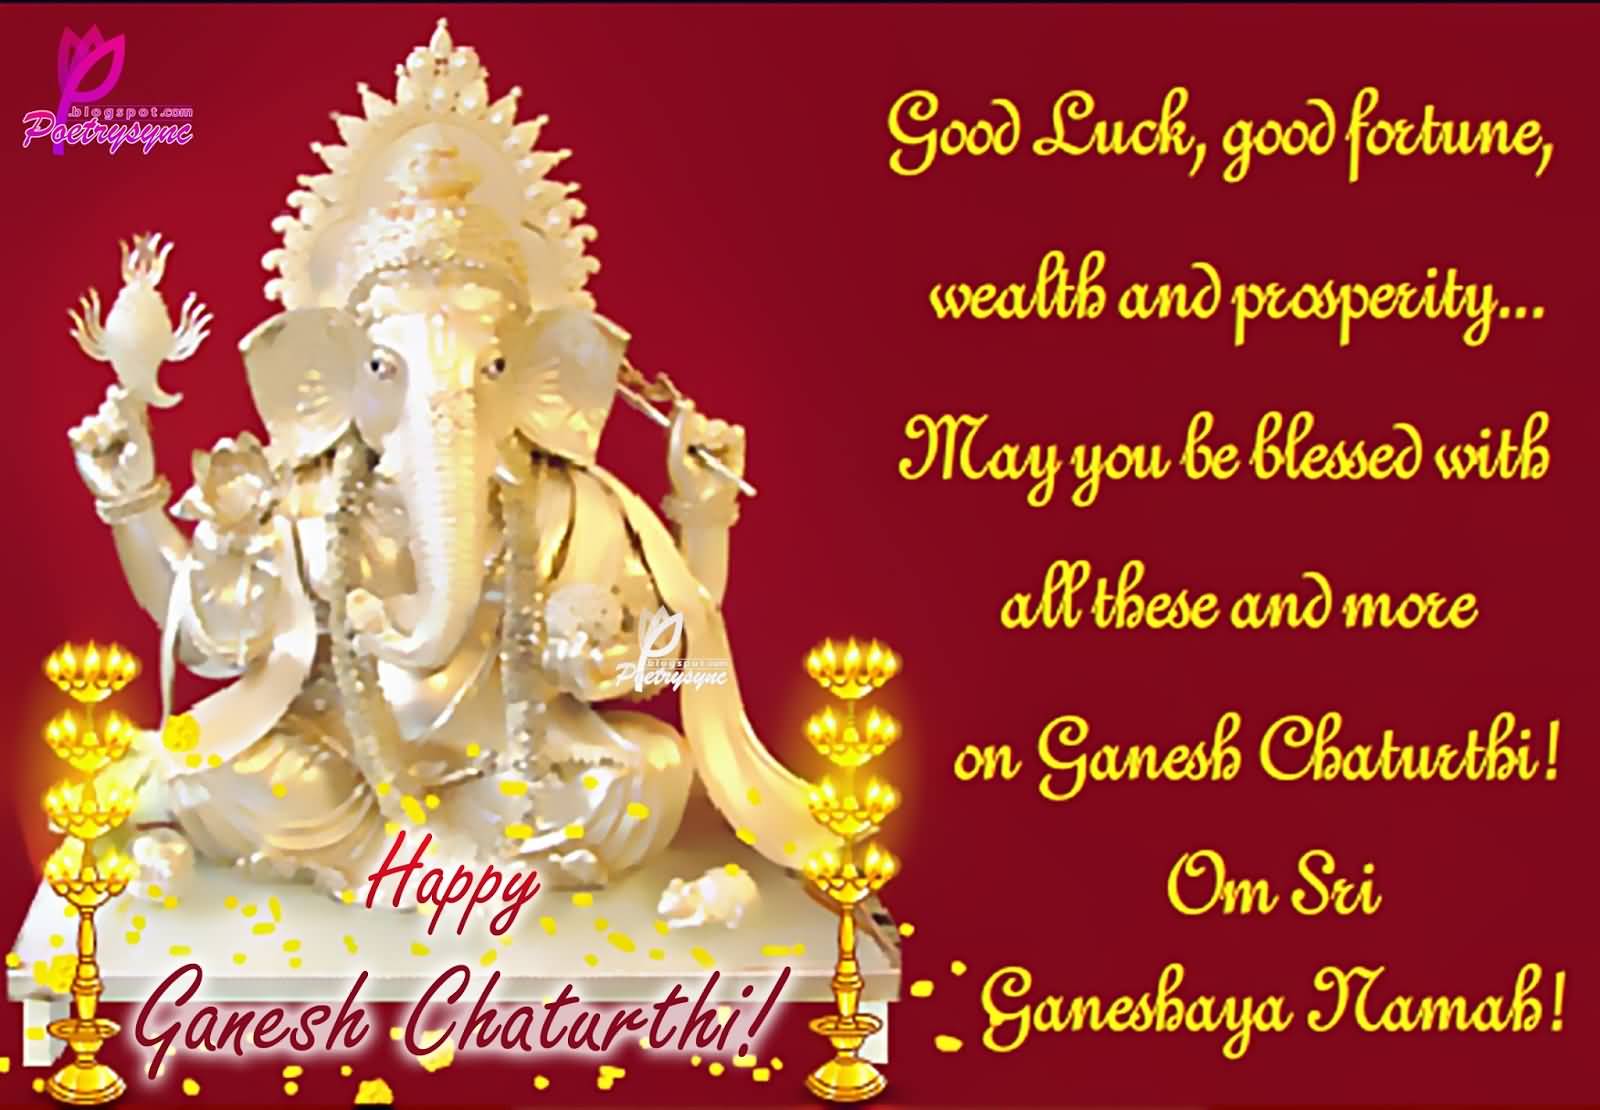 Good Luck, Good Fortune, Wealth And Prosperity May You Be Blessed With All These And More On Ganesh Chaturthi Ecard